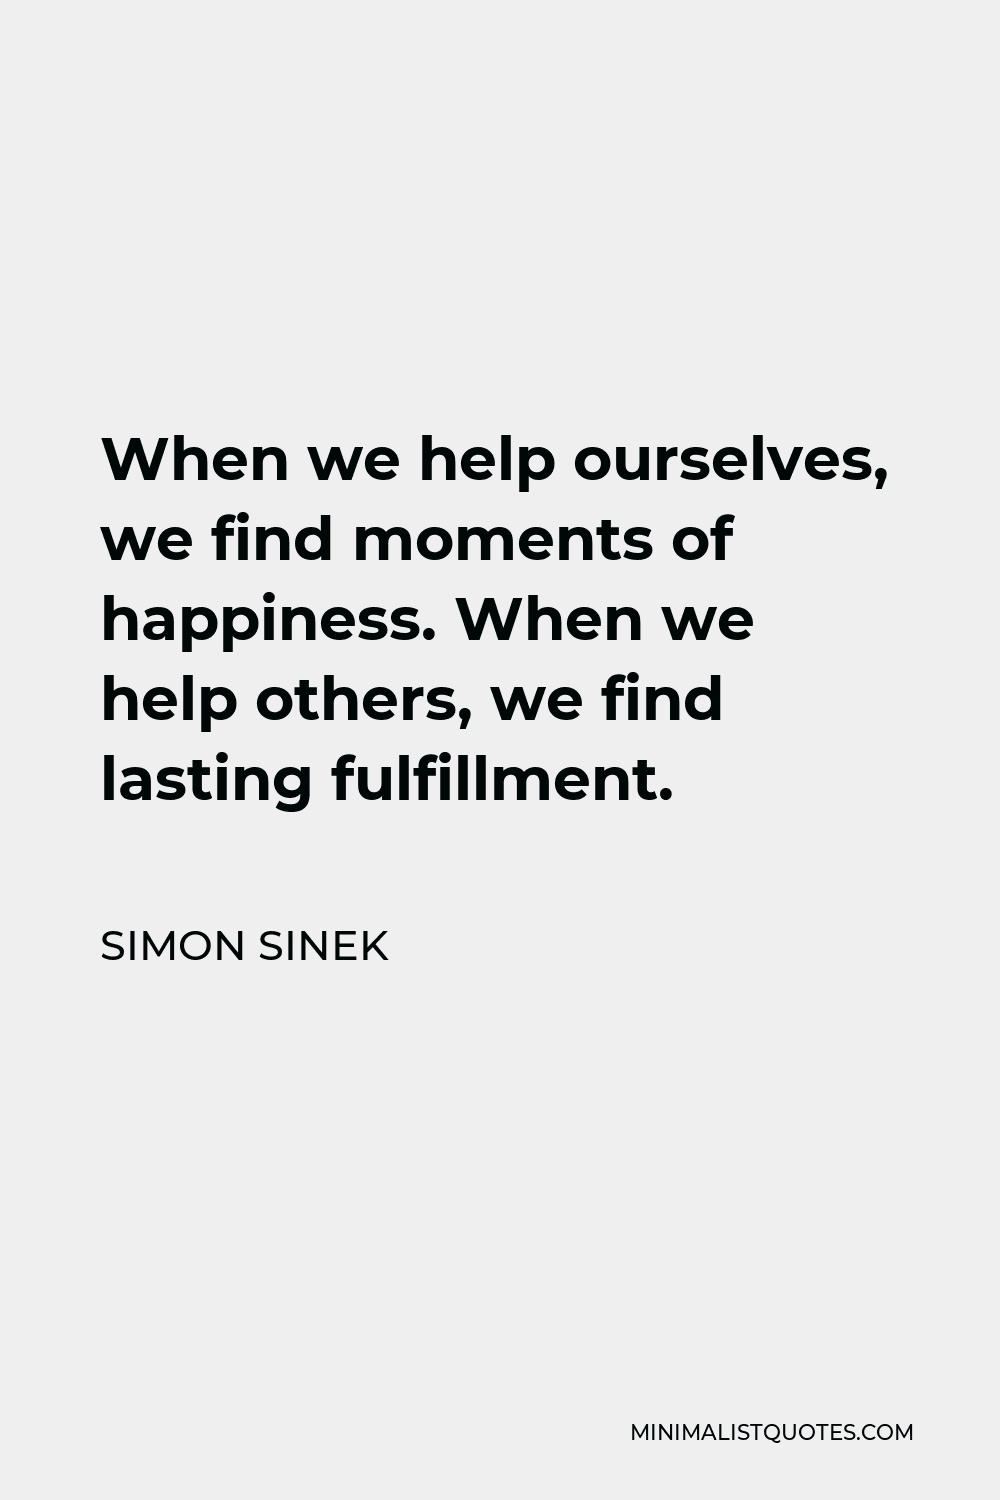 Simon Sinek Quote - When we help ourselves, we find moments of happiness. When we help others, we find lasting fulfillment.